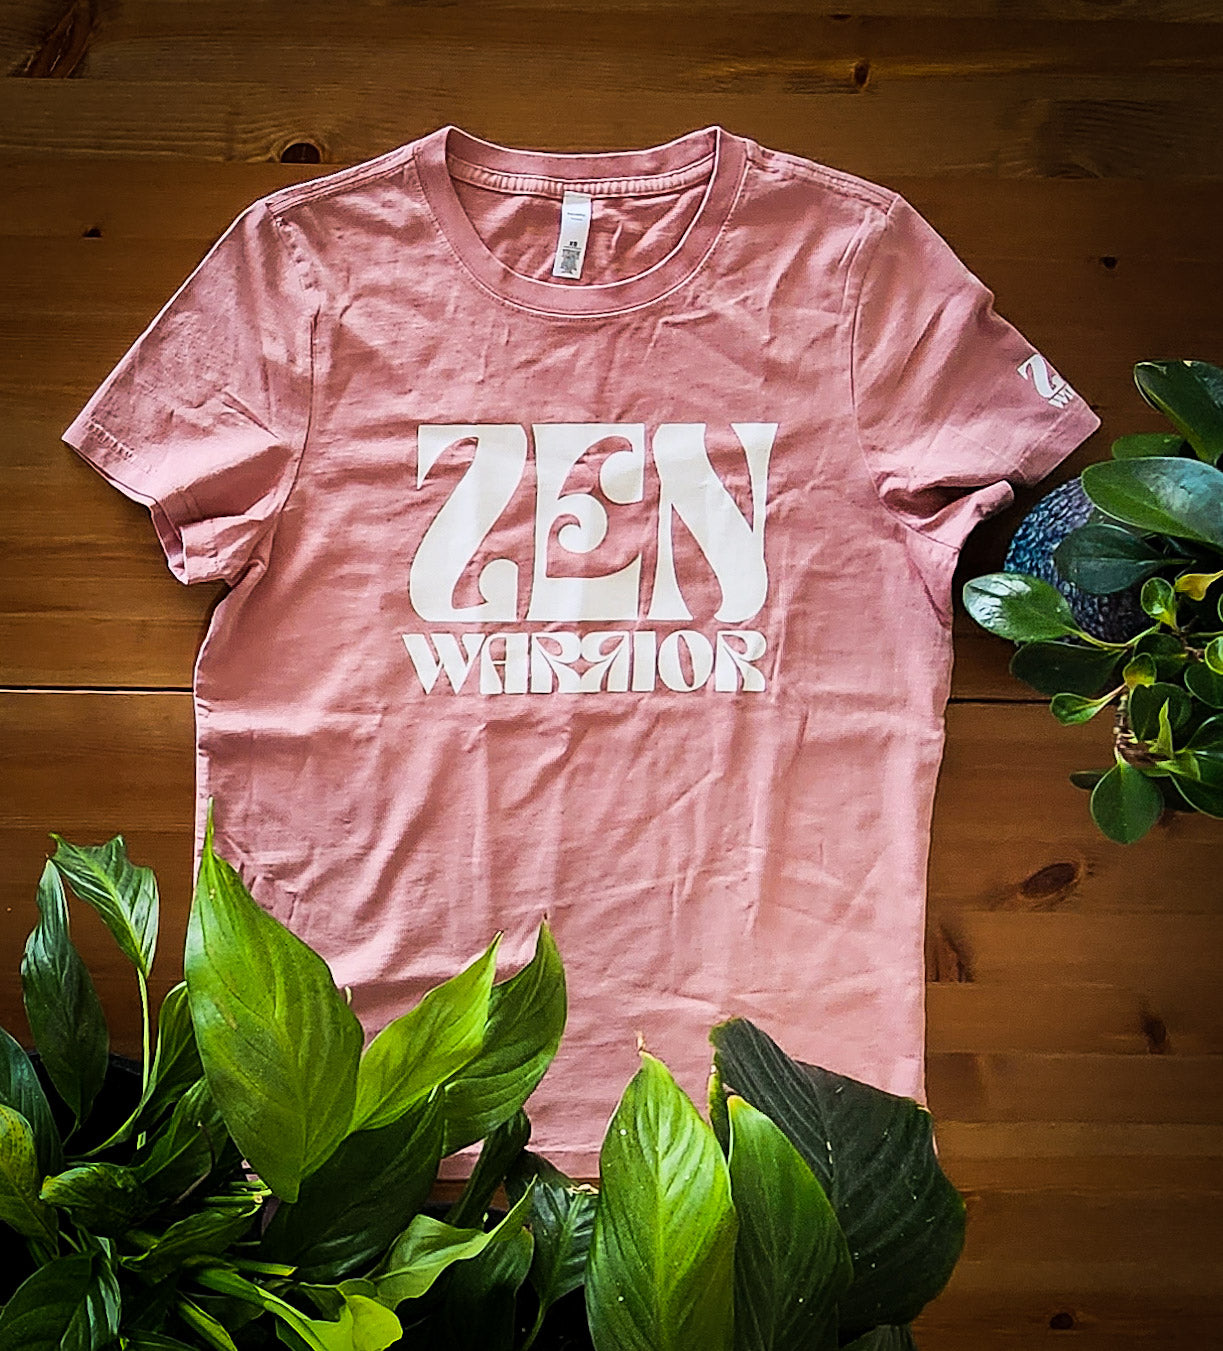 Zen Warrior Pink Tee with White Text Size, Womens